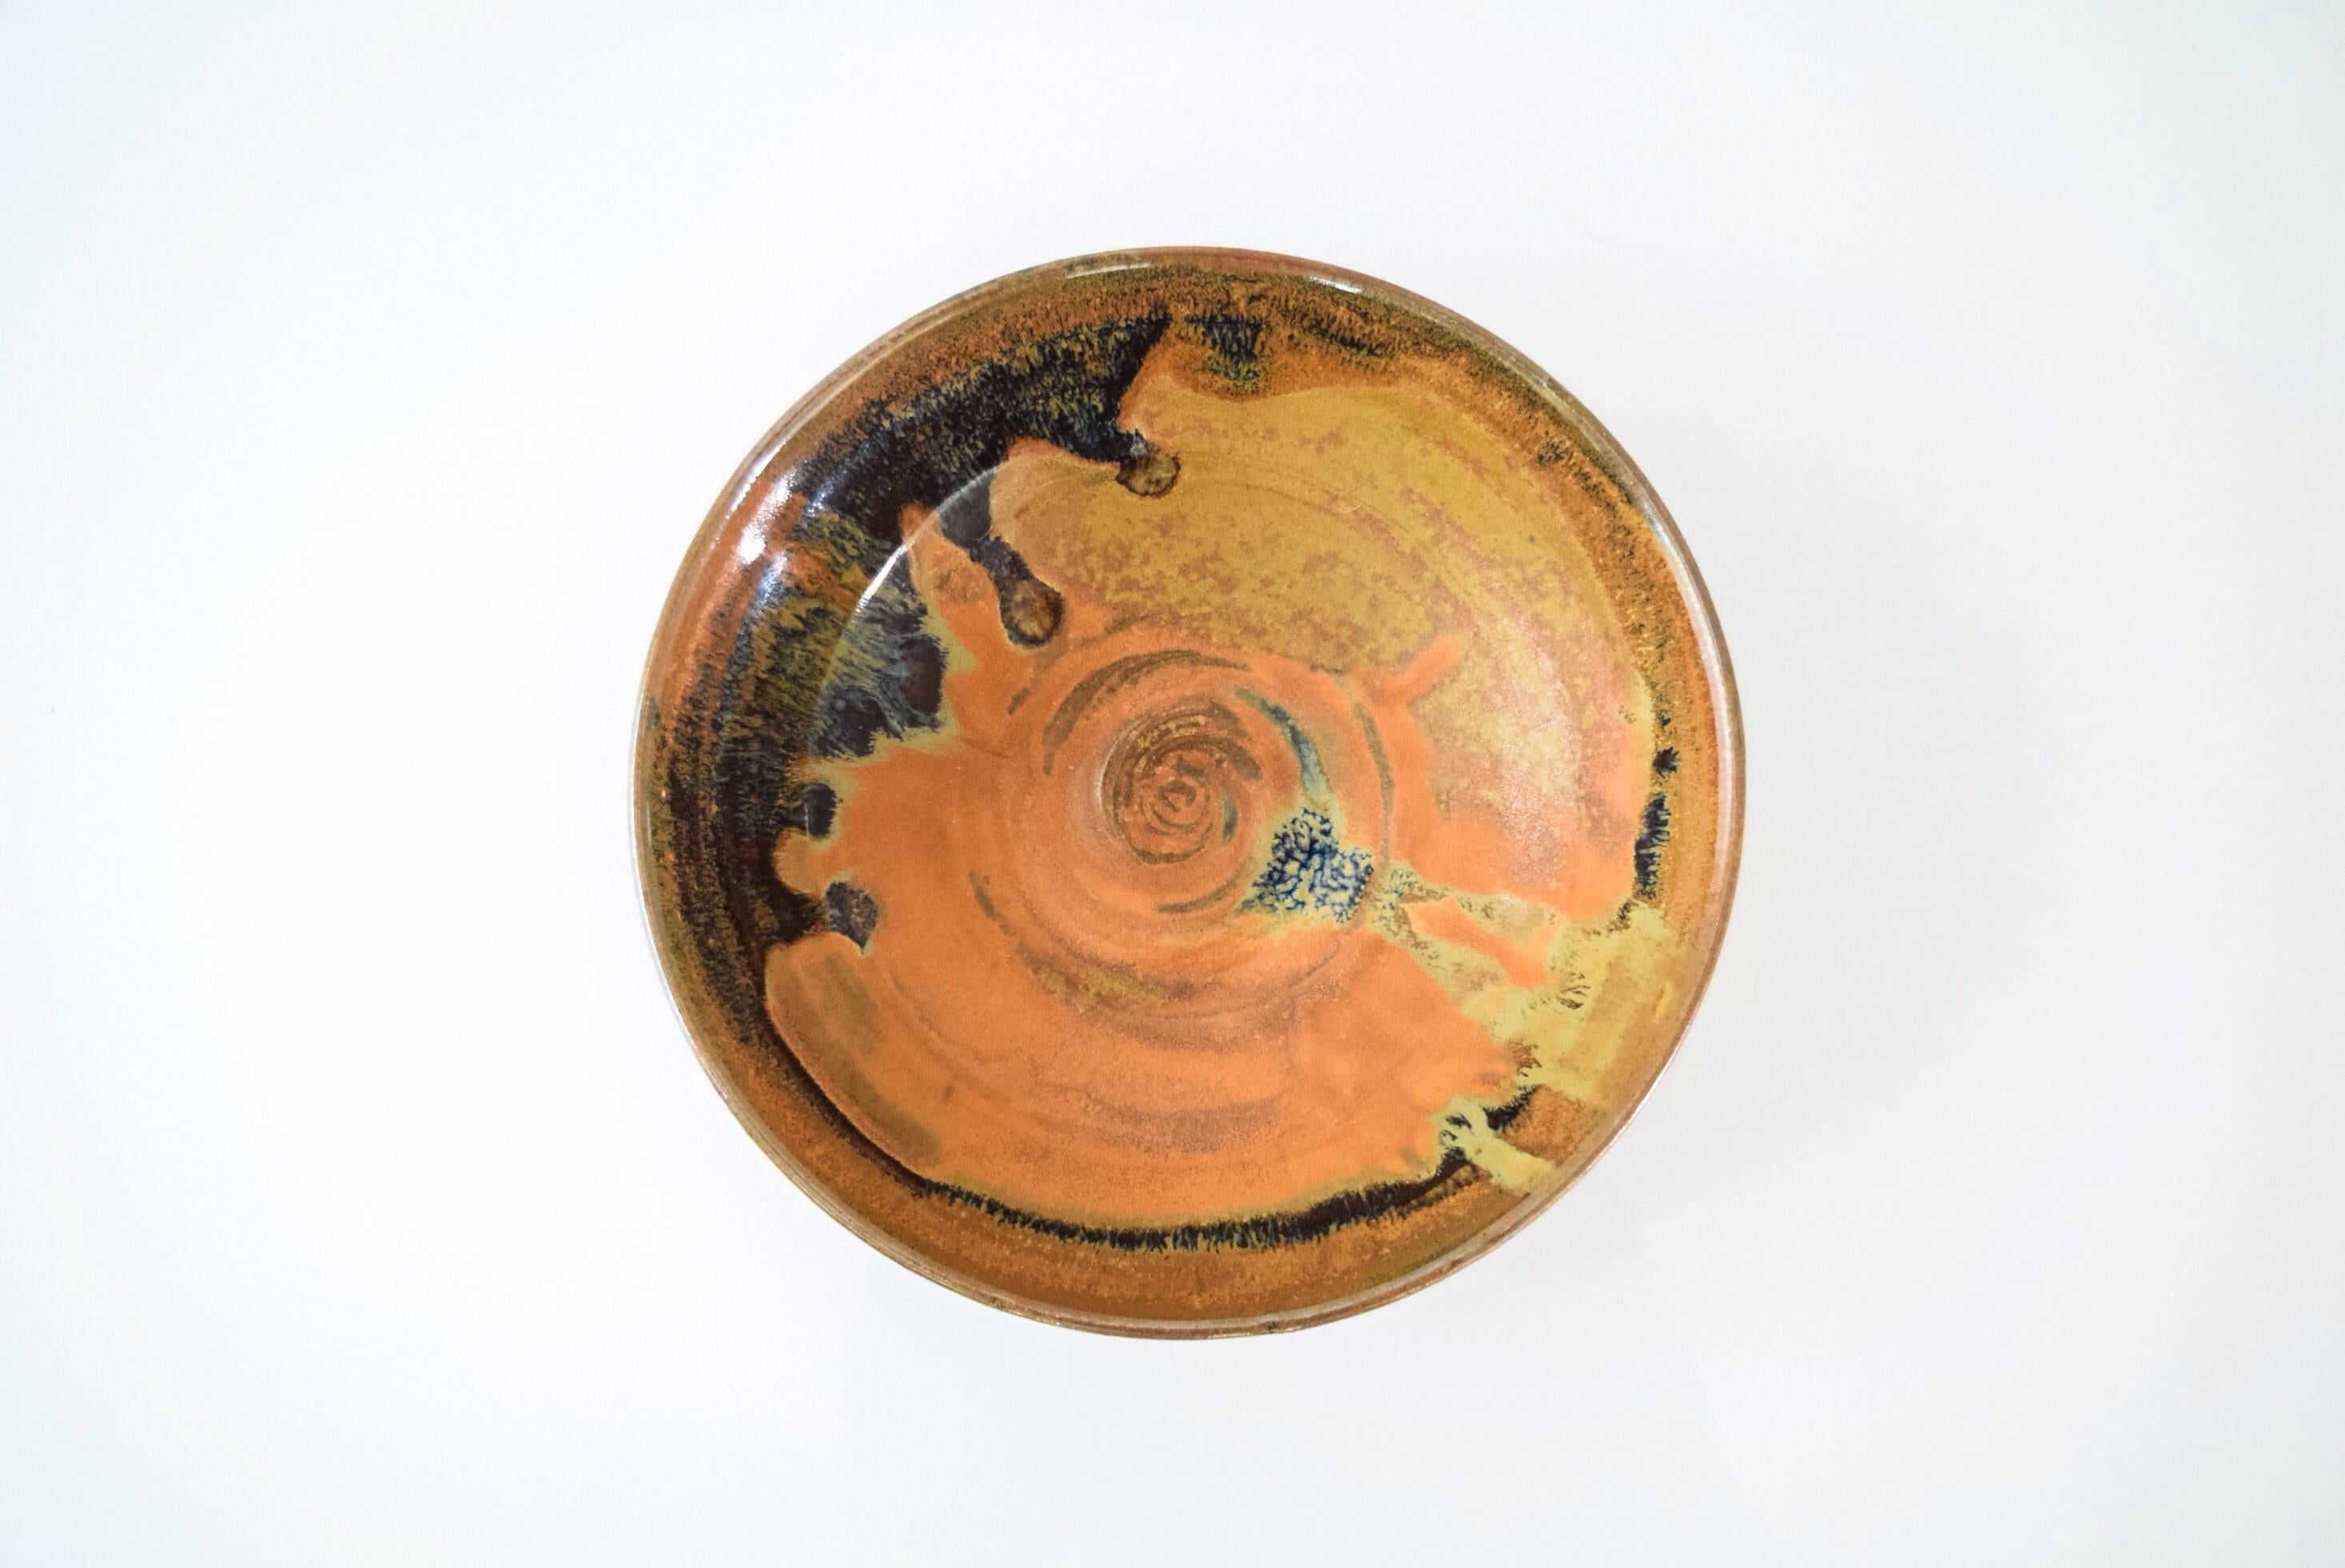 This vintage Mid-Century Modern ceramic pottery bowl is circa 1960. It features a simple modernist handcrafted design with beautiful shades of natural burnt orange, gold, blue and black in varying sheens.

Dimensions:
Diameter 7 1/8